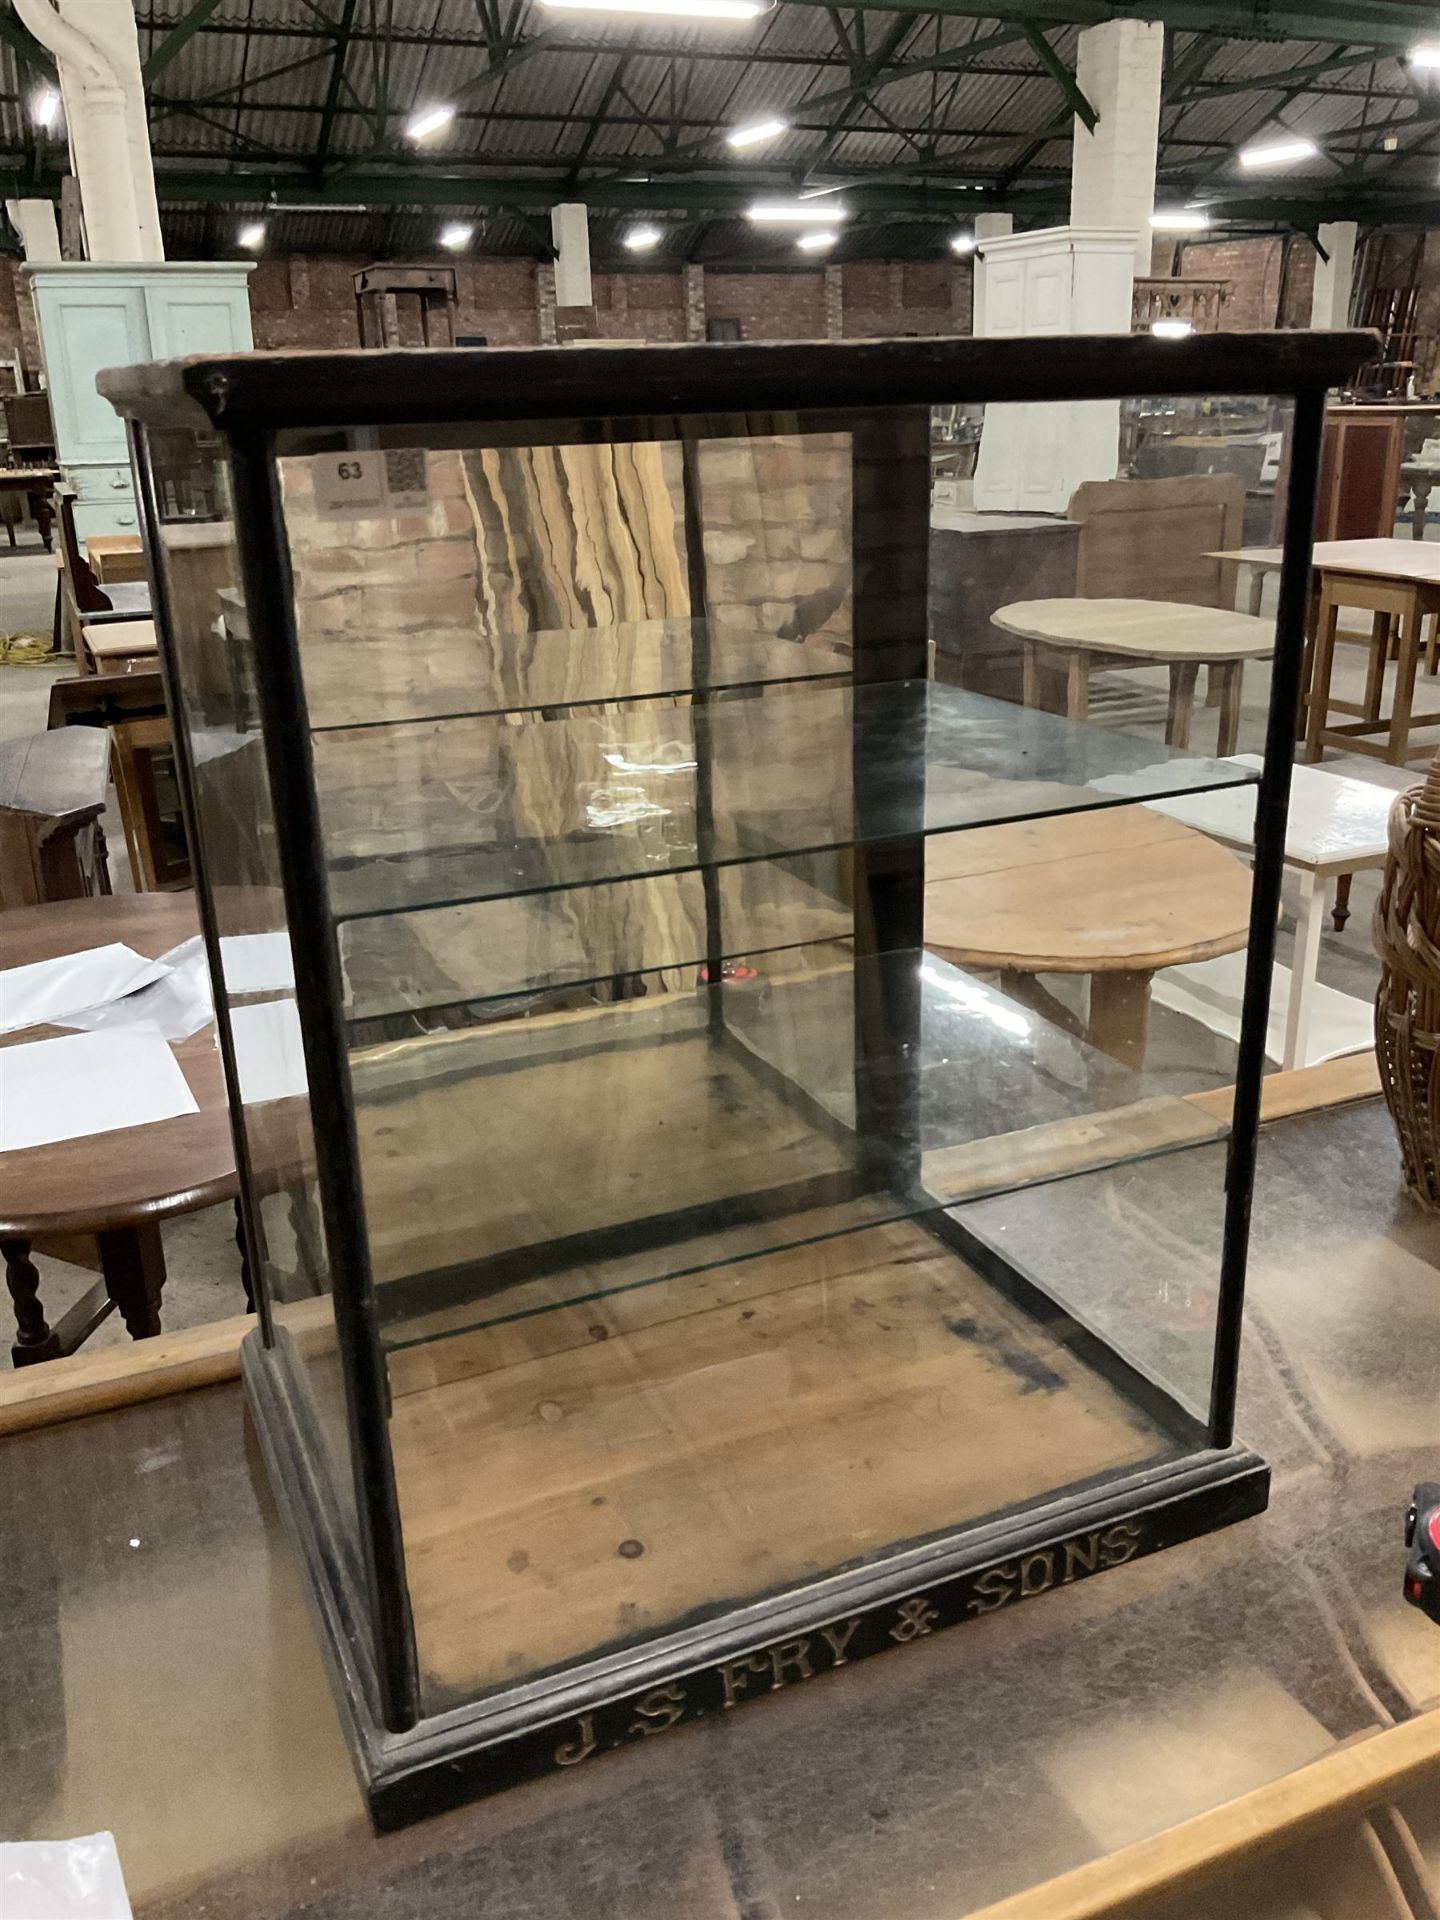 J S Fry & Sons - Victorian glazed and ebonised chocolate countertop display cabinet